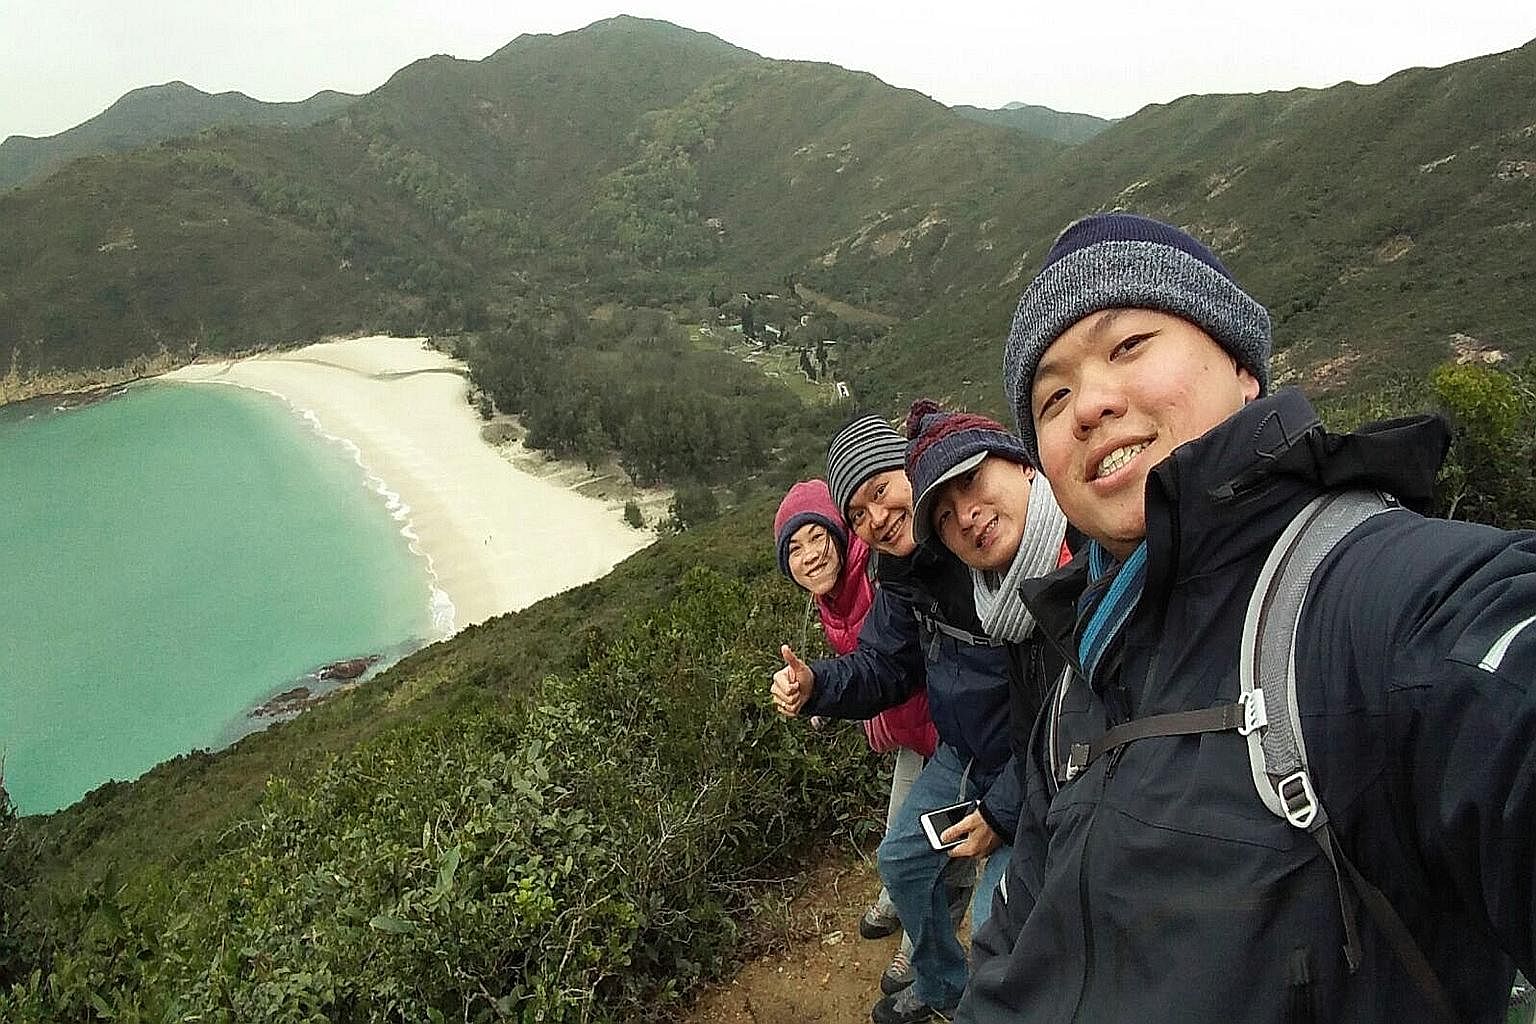 Up in the mountains, it was below 0 deg C, with ice pellets and frost forming. Mr Tan managed to snare a unique souvenir of his trip: a snapshot of icicles. Singaporean pilot Mr Tan and his three friends were hiking at Sai Kung in the New Territories